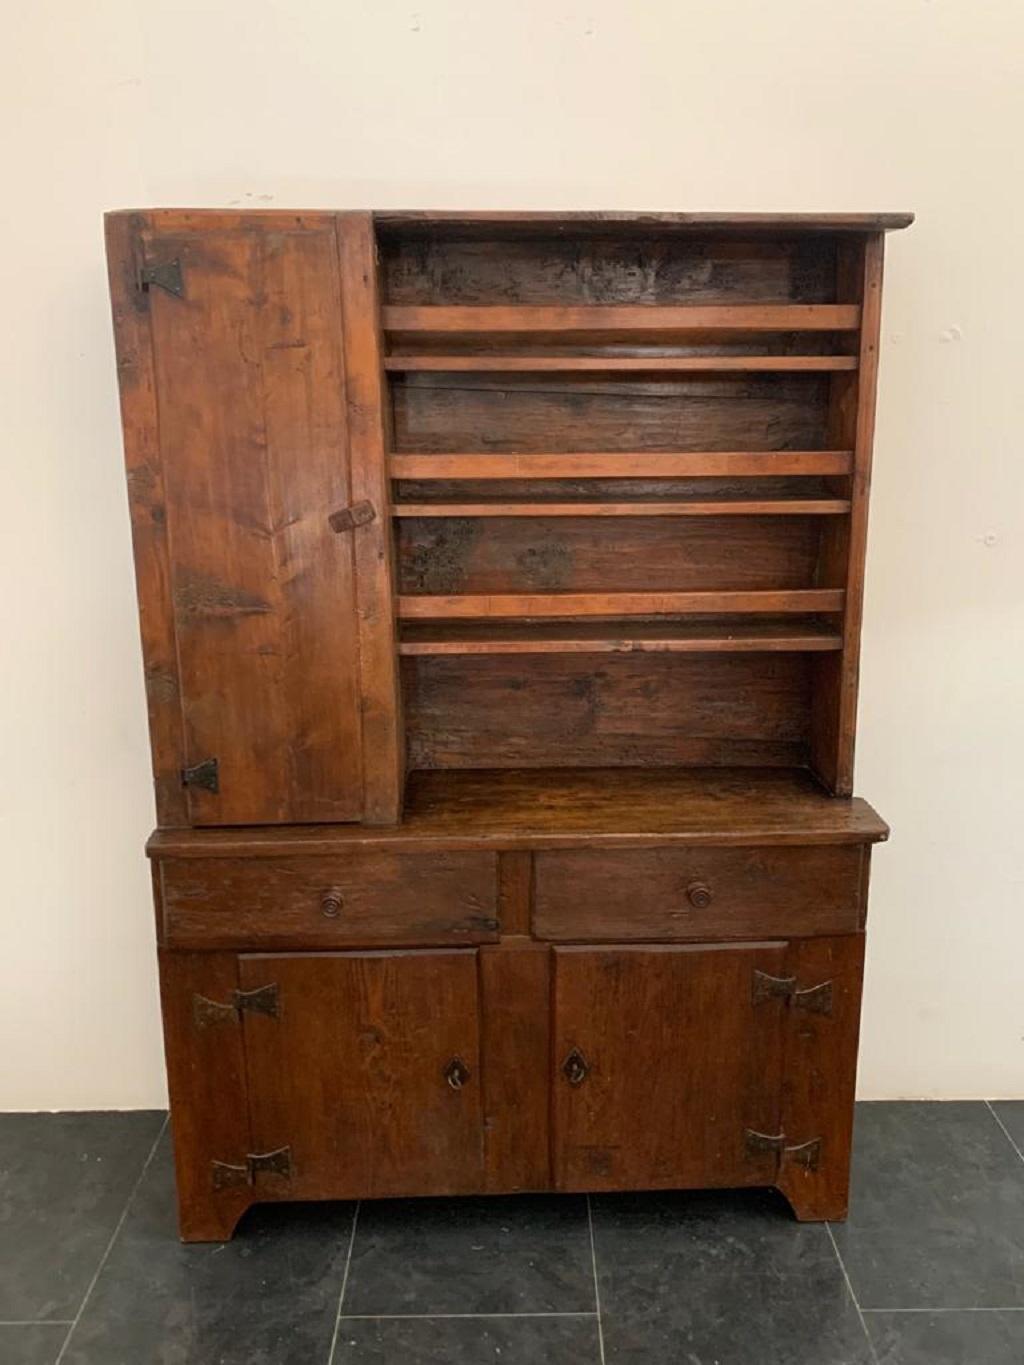 Spruce sideboard with plate rack, 17th century. Patina due to age and use. Various restorations made over time. Solid and ready for use.
Packaging with bubble wrap and cardboard boxes is included. If the wooden packaging is needed (fumigated crates